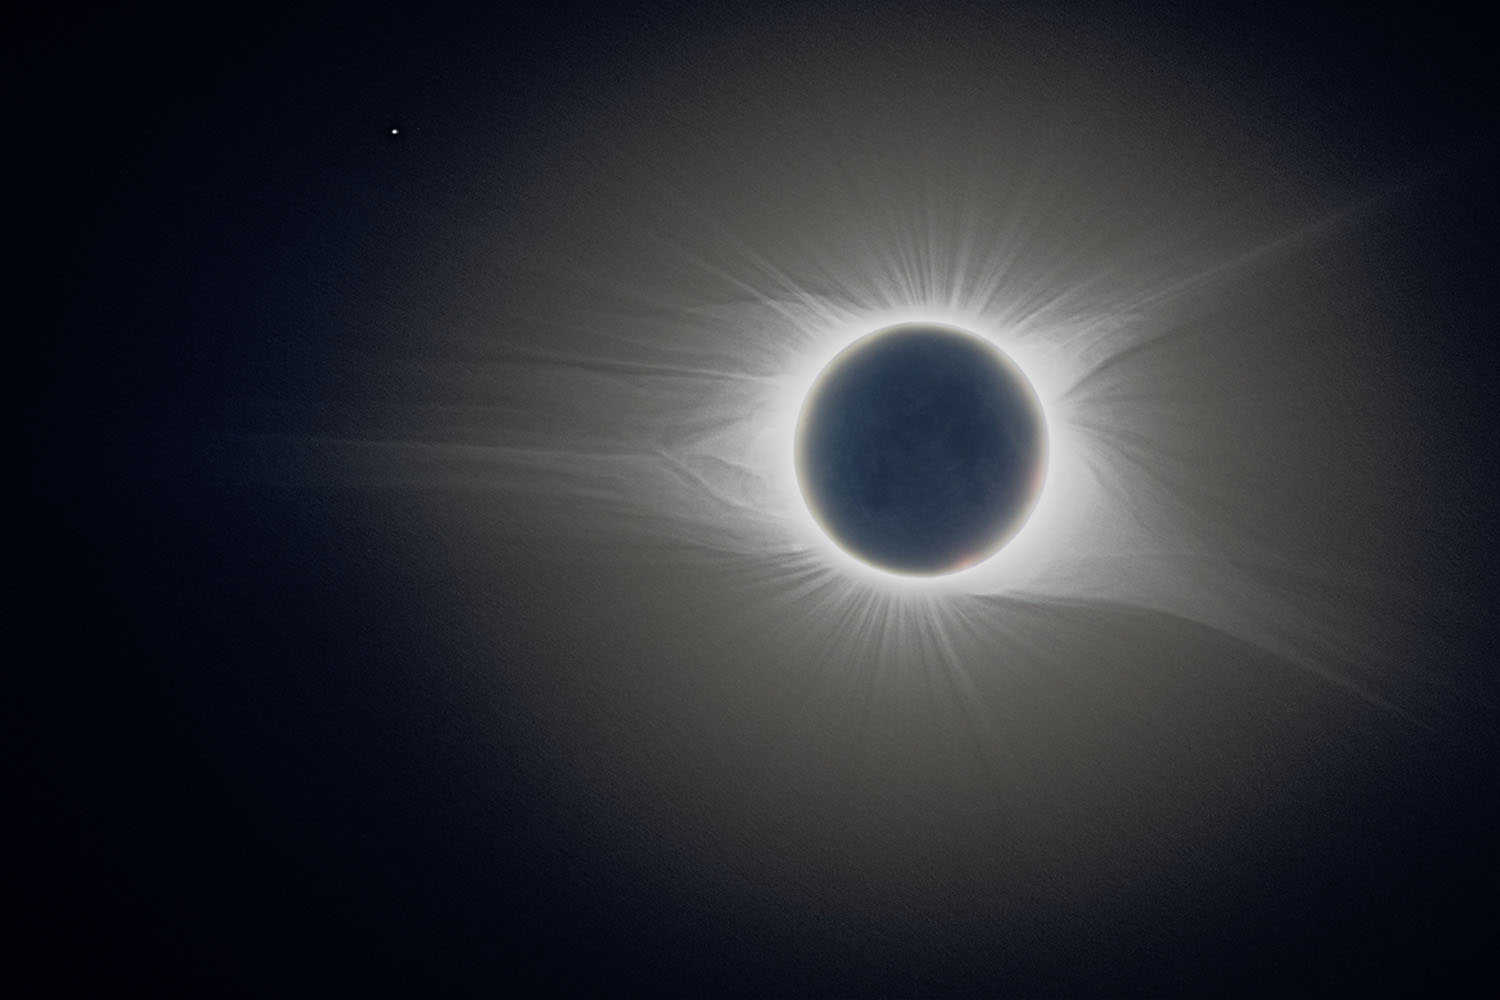 Photographing a Total Solar Eclipse